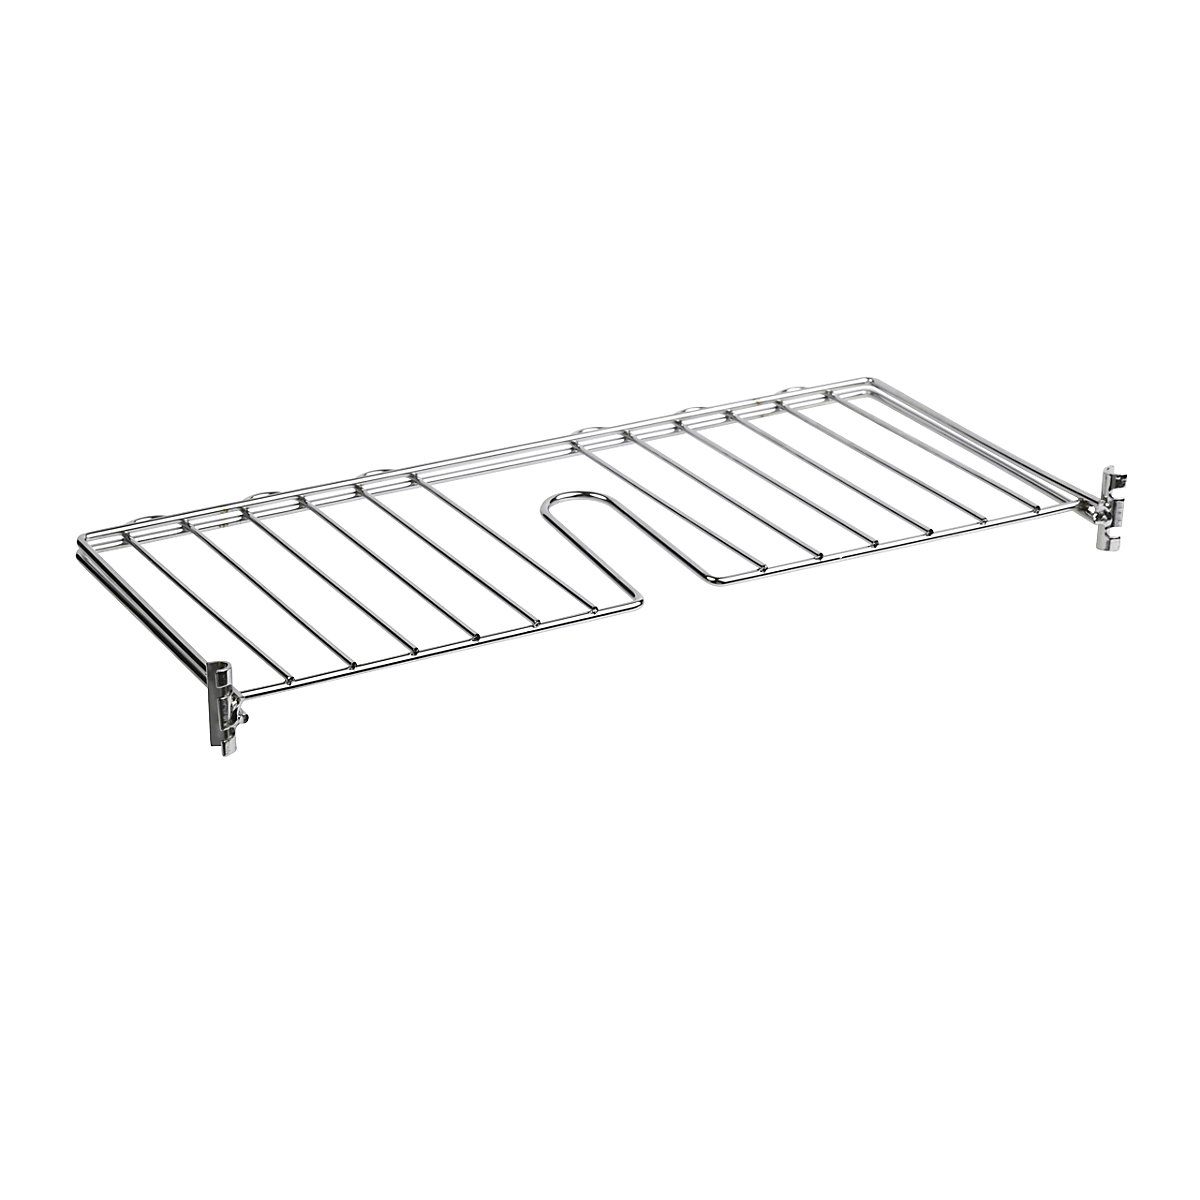 Shelf divider for chrome plated table trolley, height 215 mm